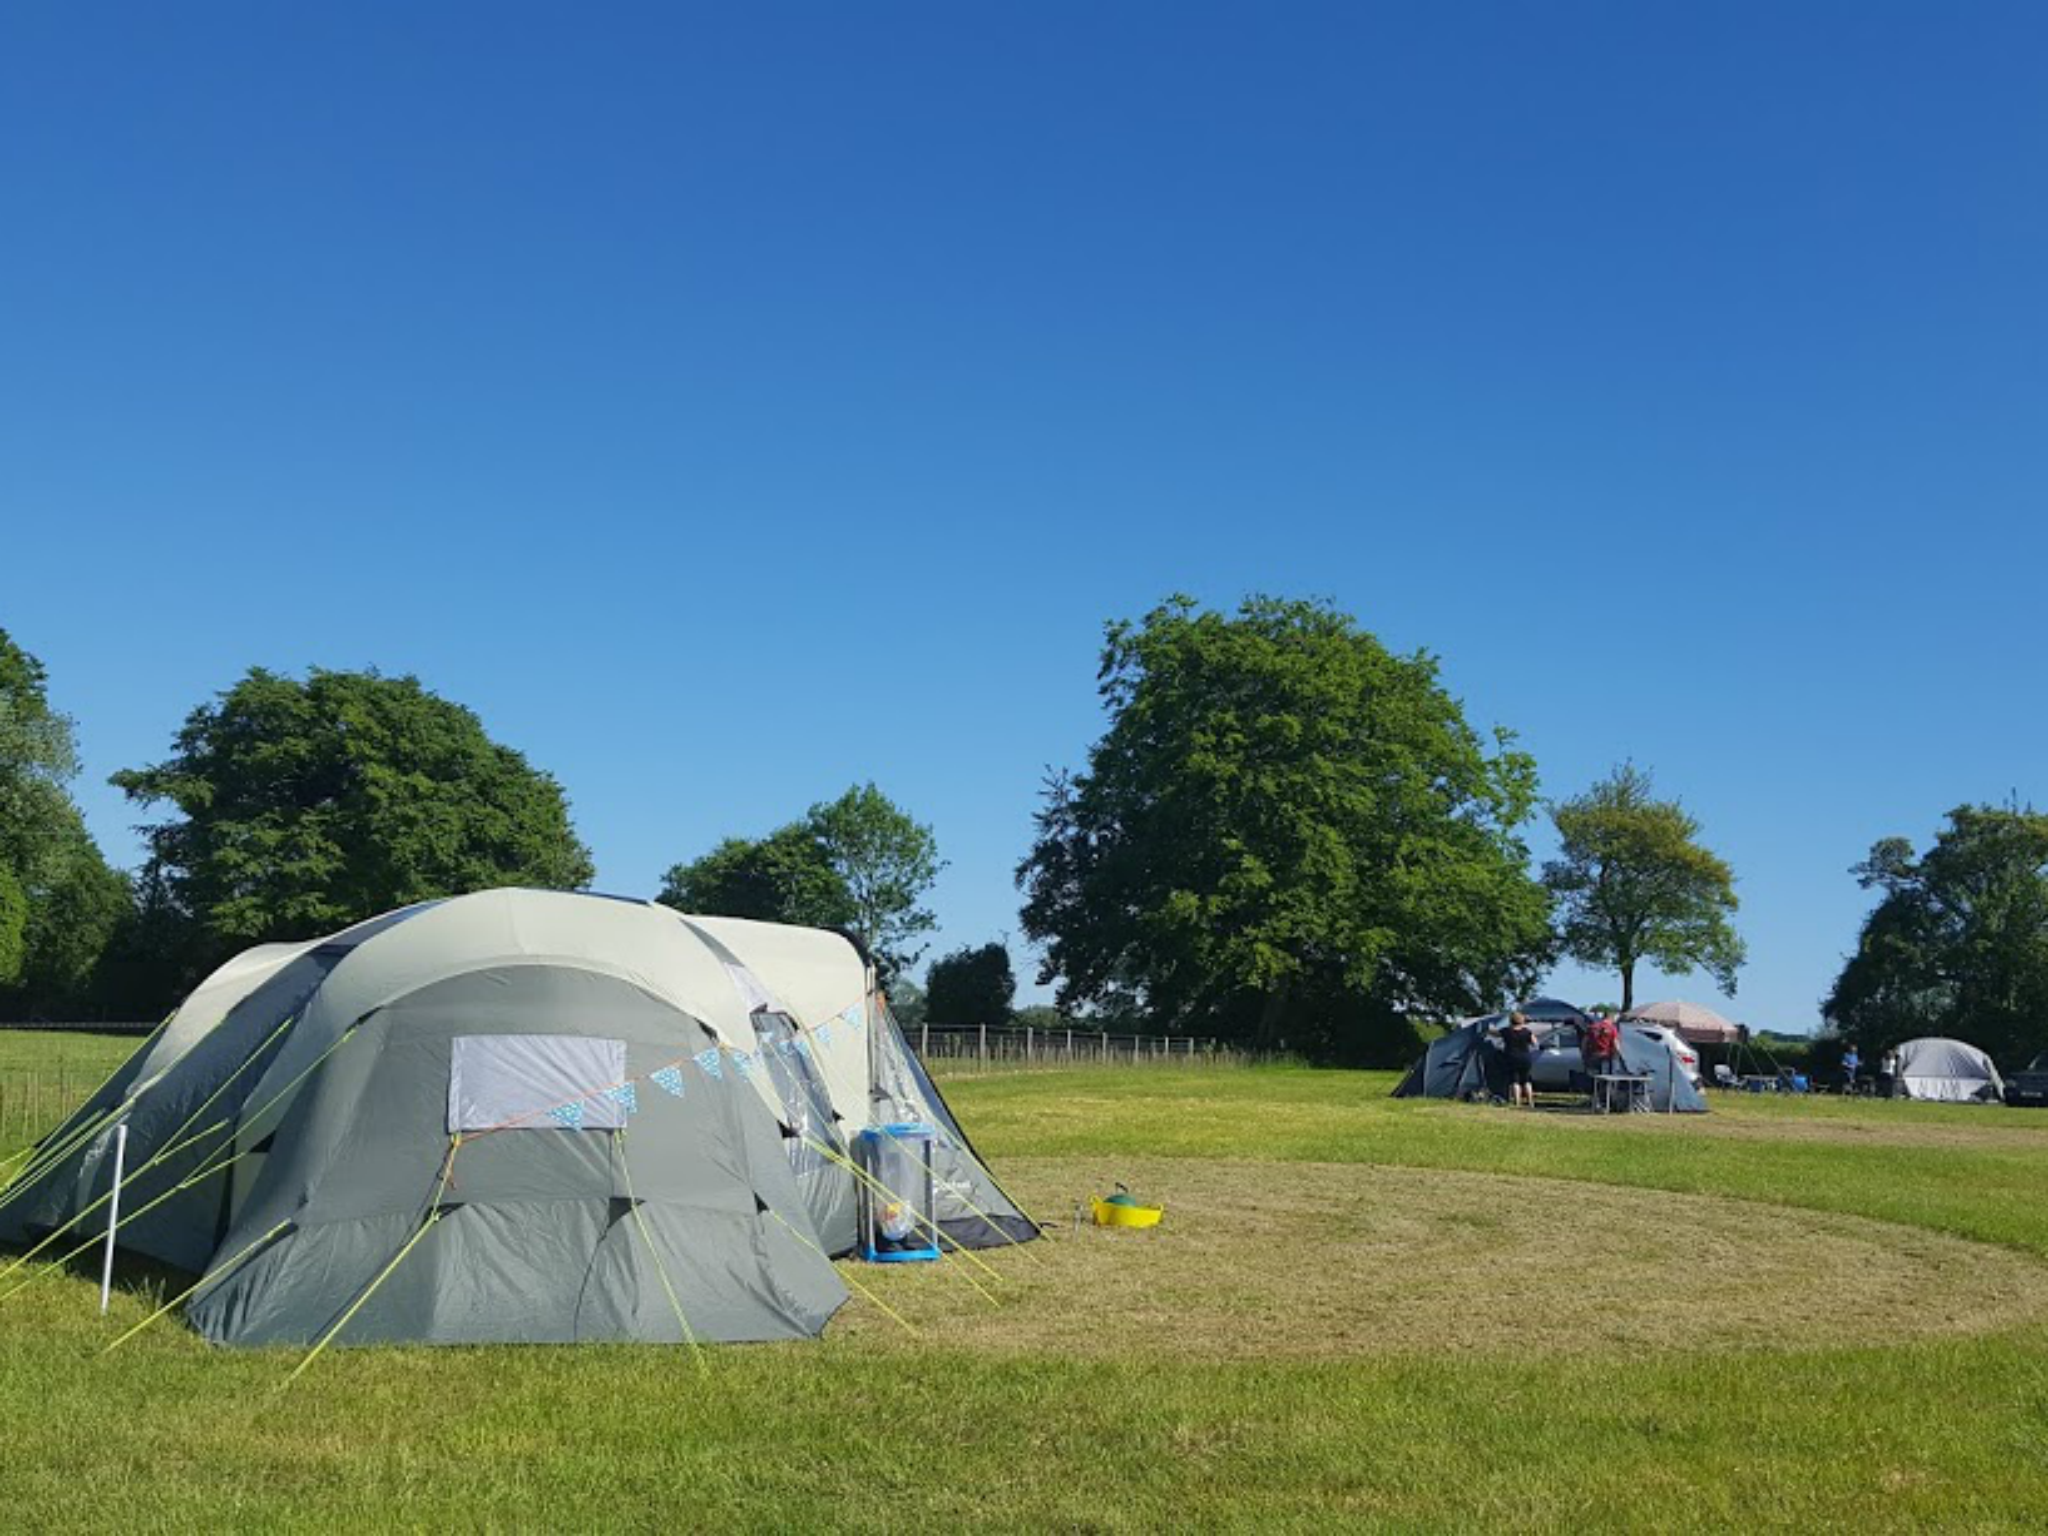 Best Camping Near London 16 Gorgeous Campsites Near London To